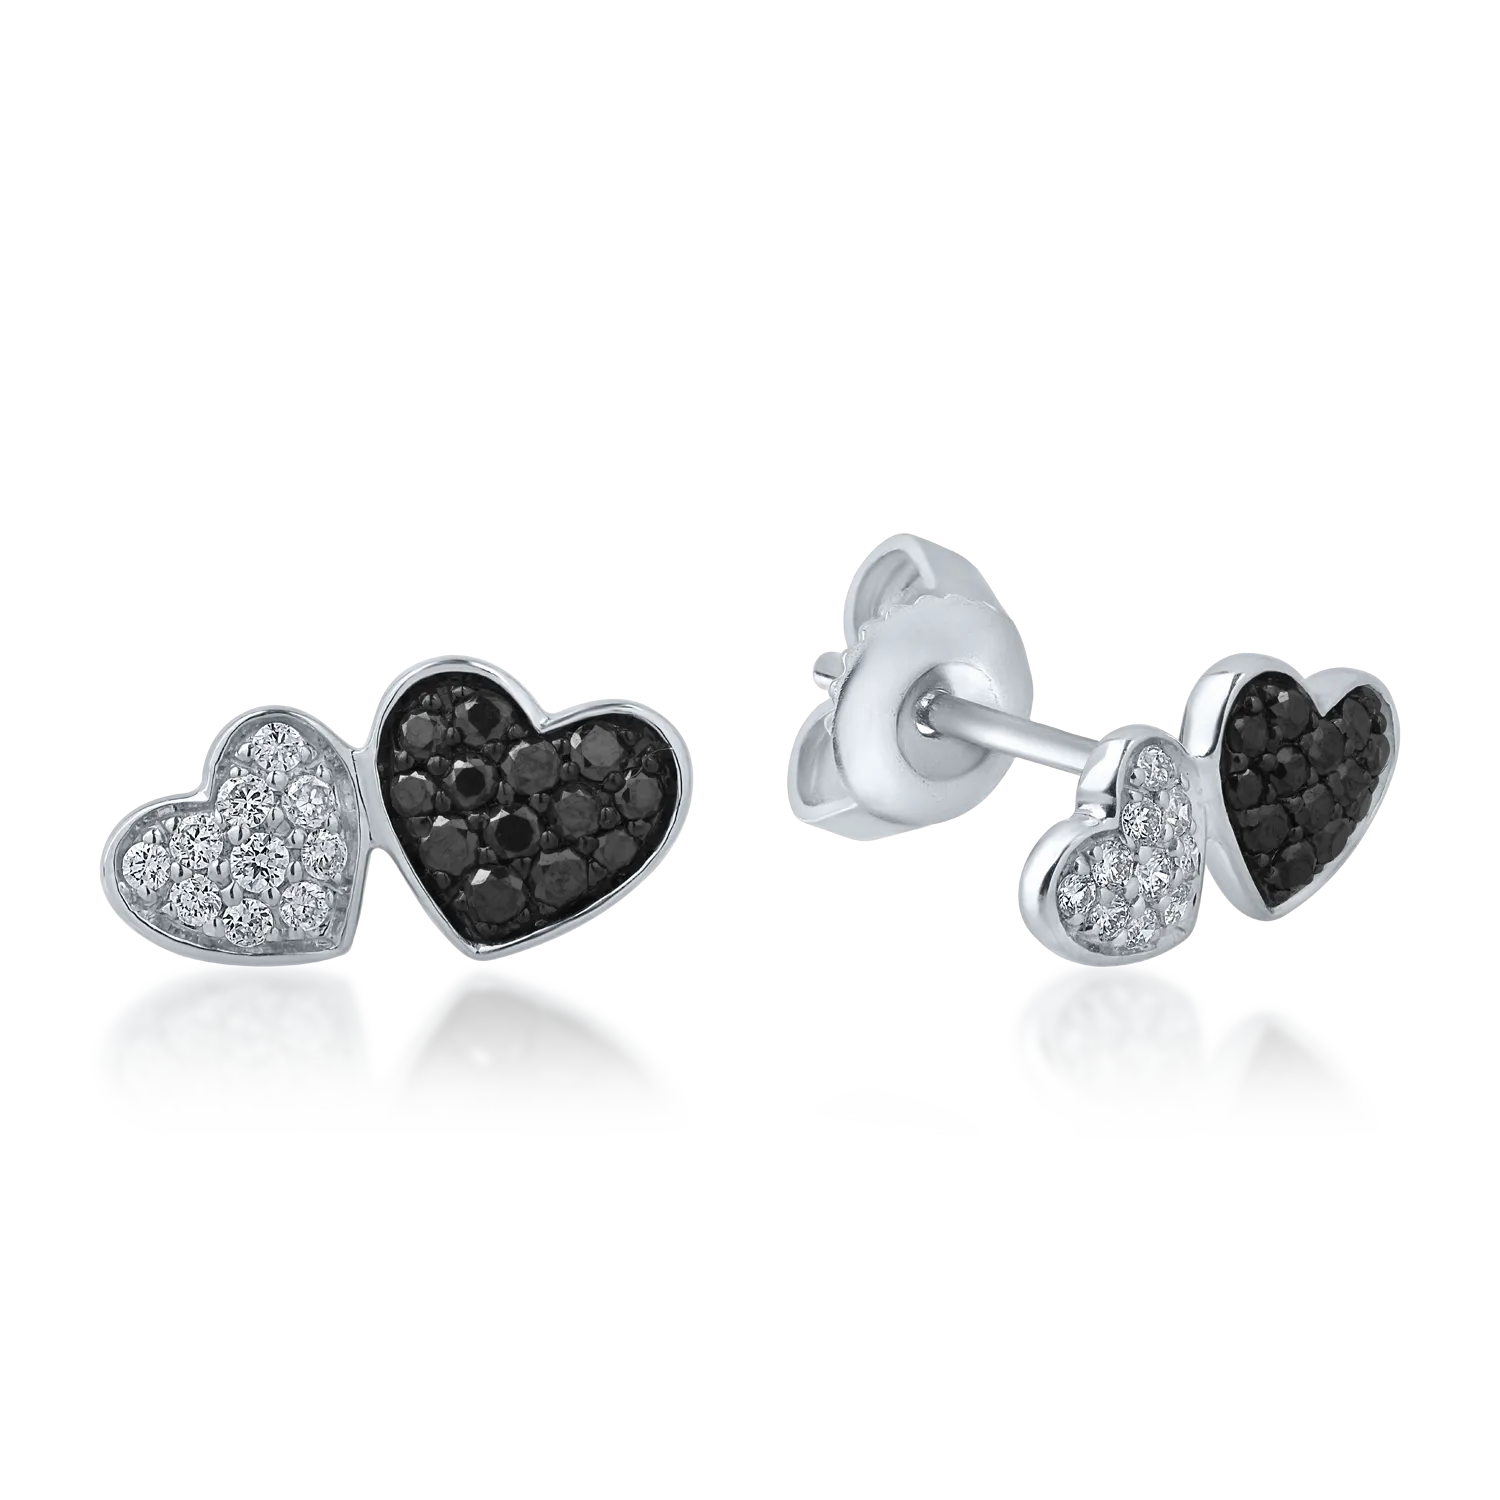 White gold heart earrings with 0.13ct black diamonds and 0.07ct clear diamonds